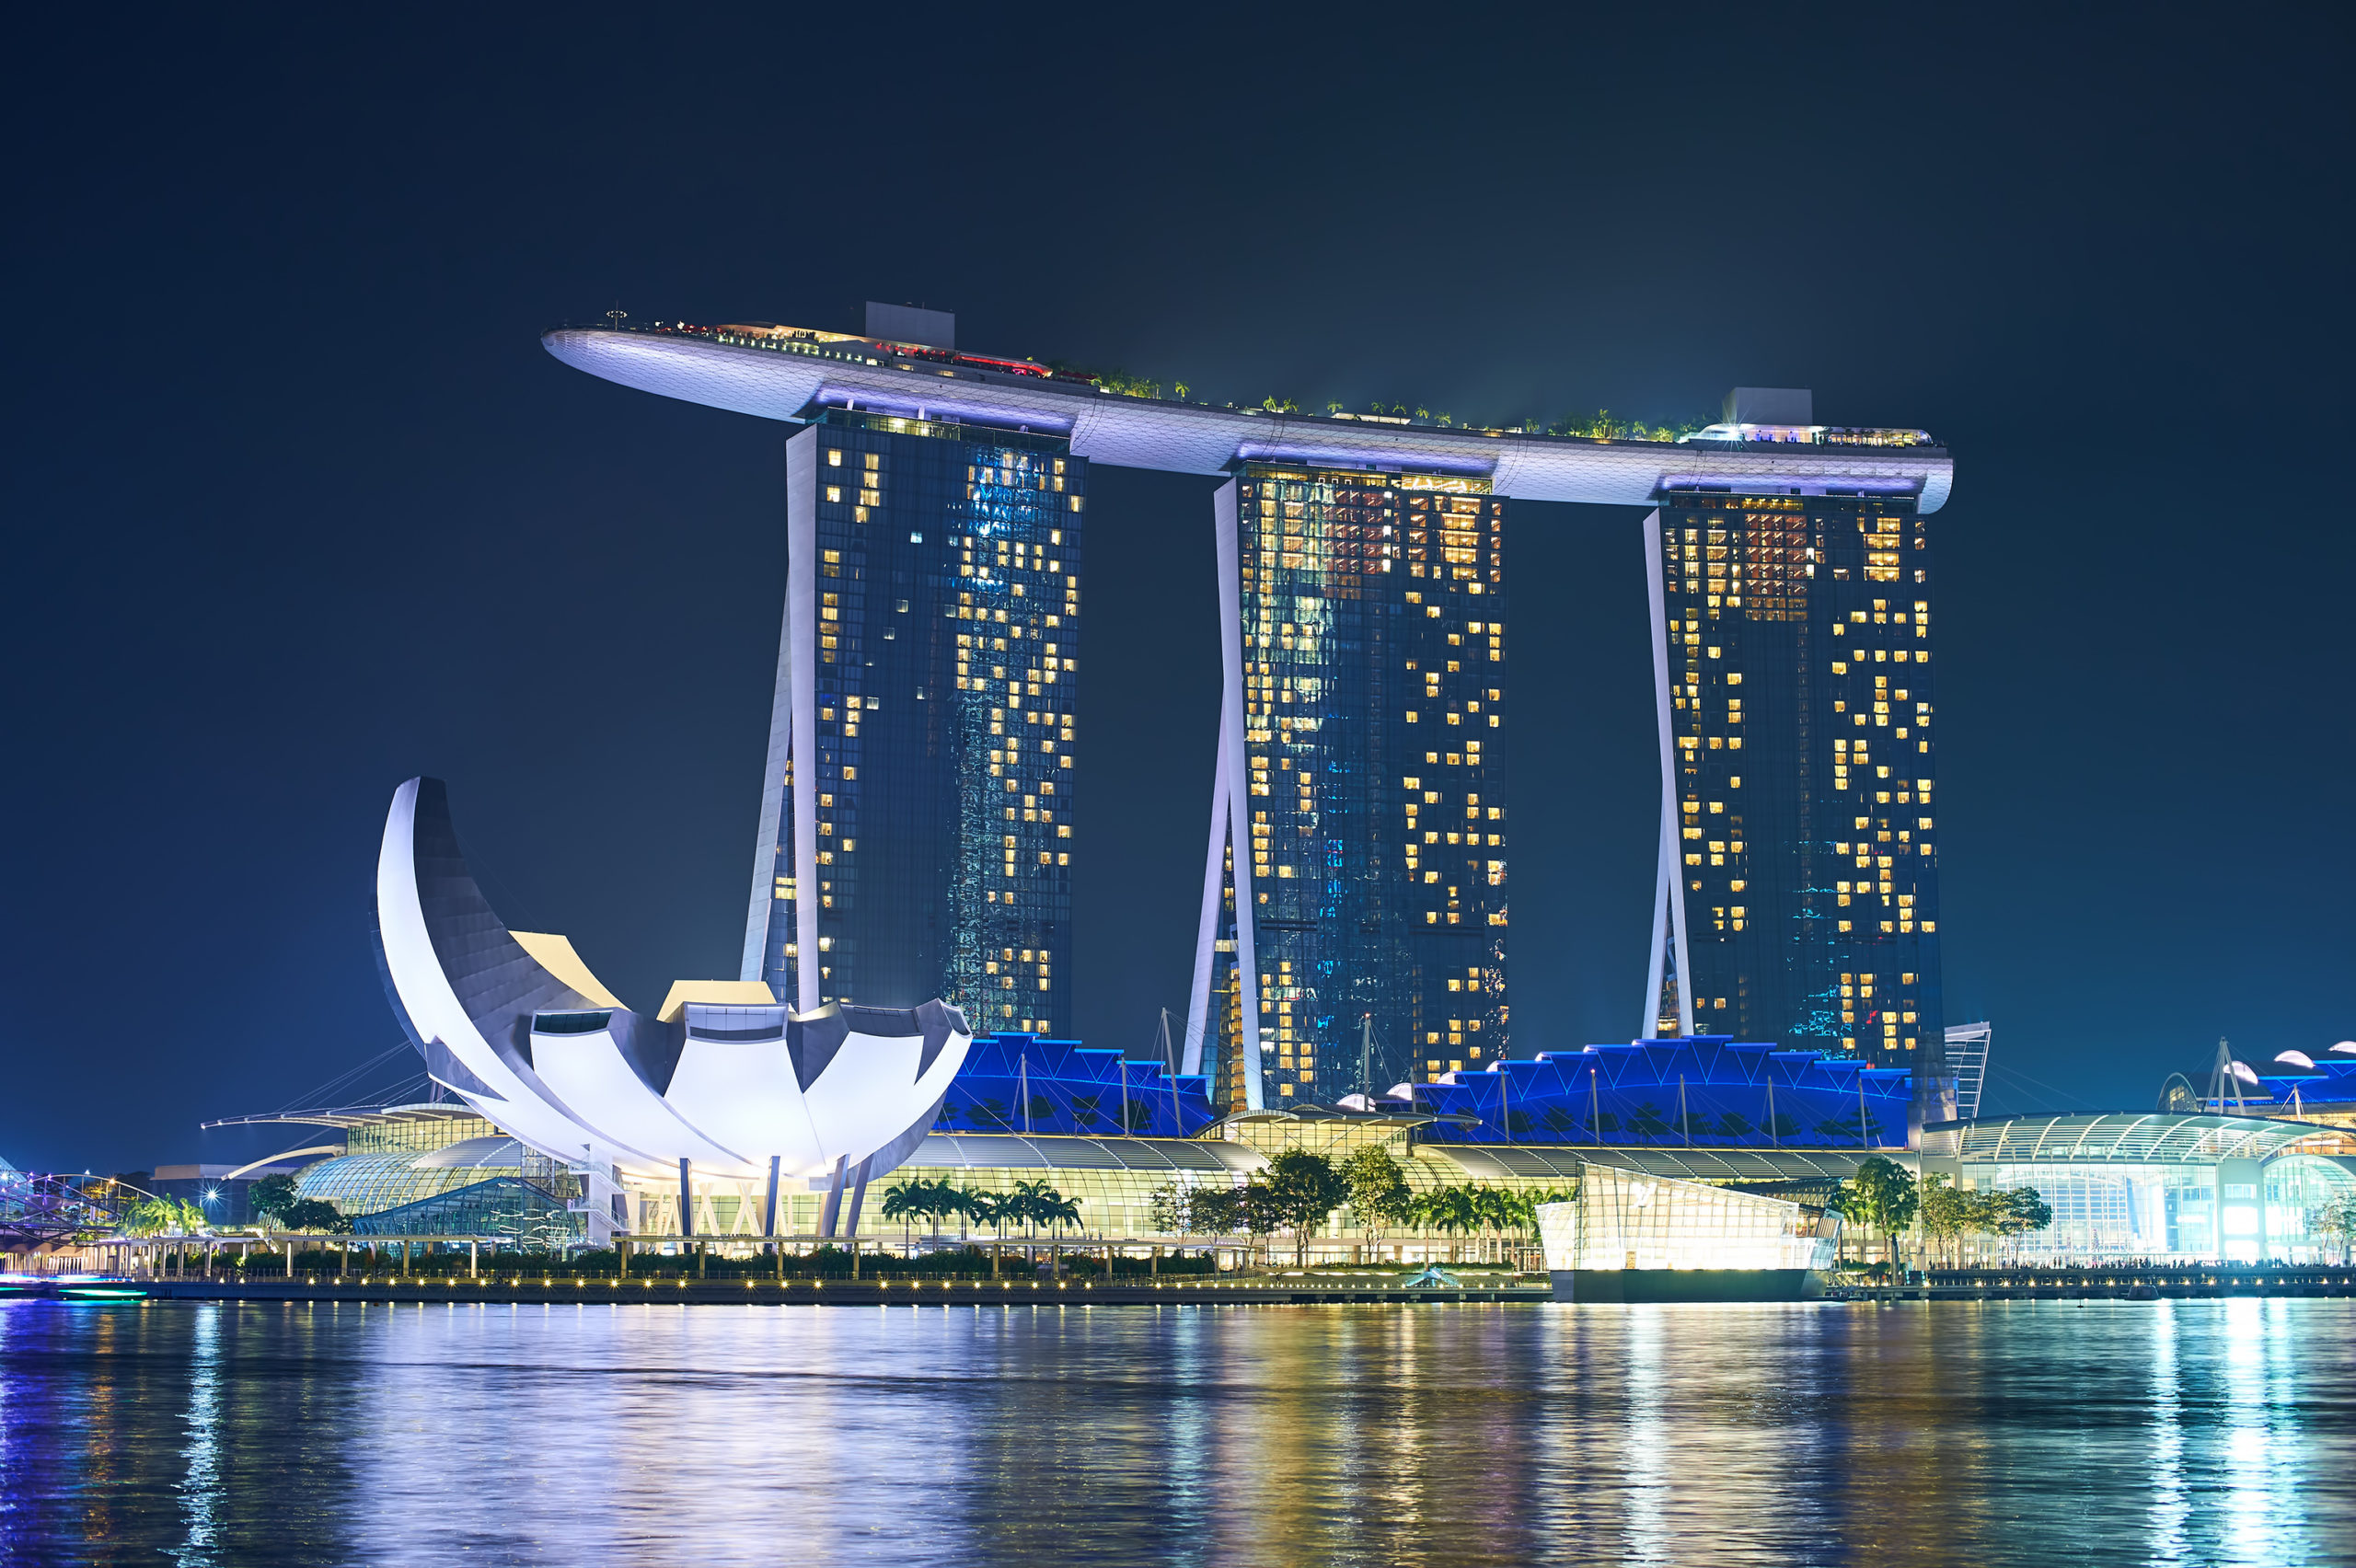 Marina Bay Sands Infinity Pool in Singapore, an iconic rooftop pool with breathtaking city views, featuring a luxurious and infinity-edge design.